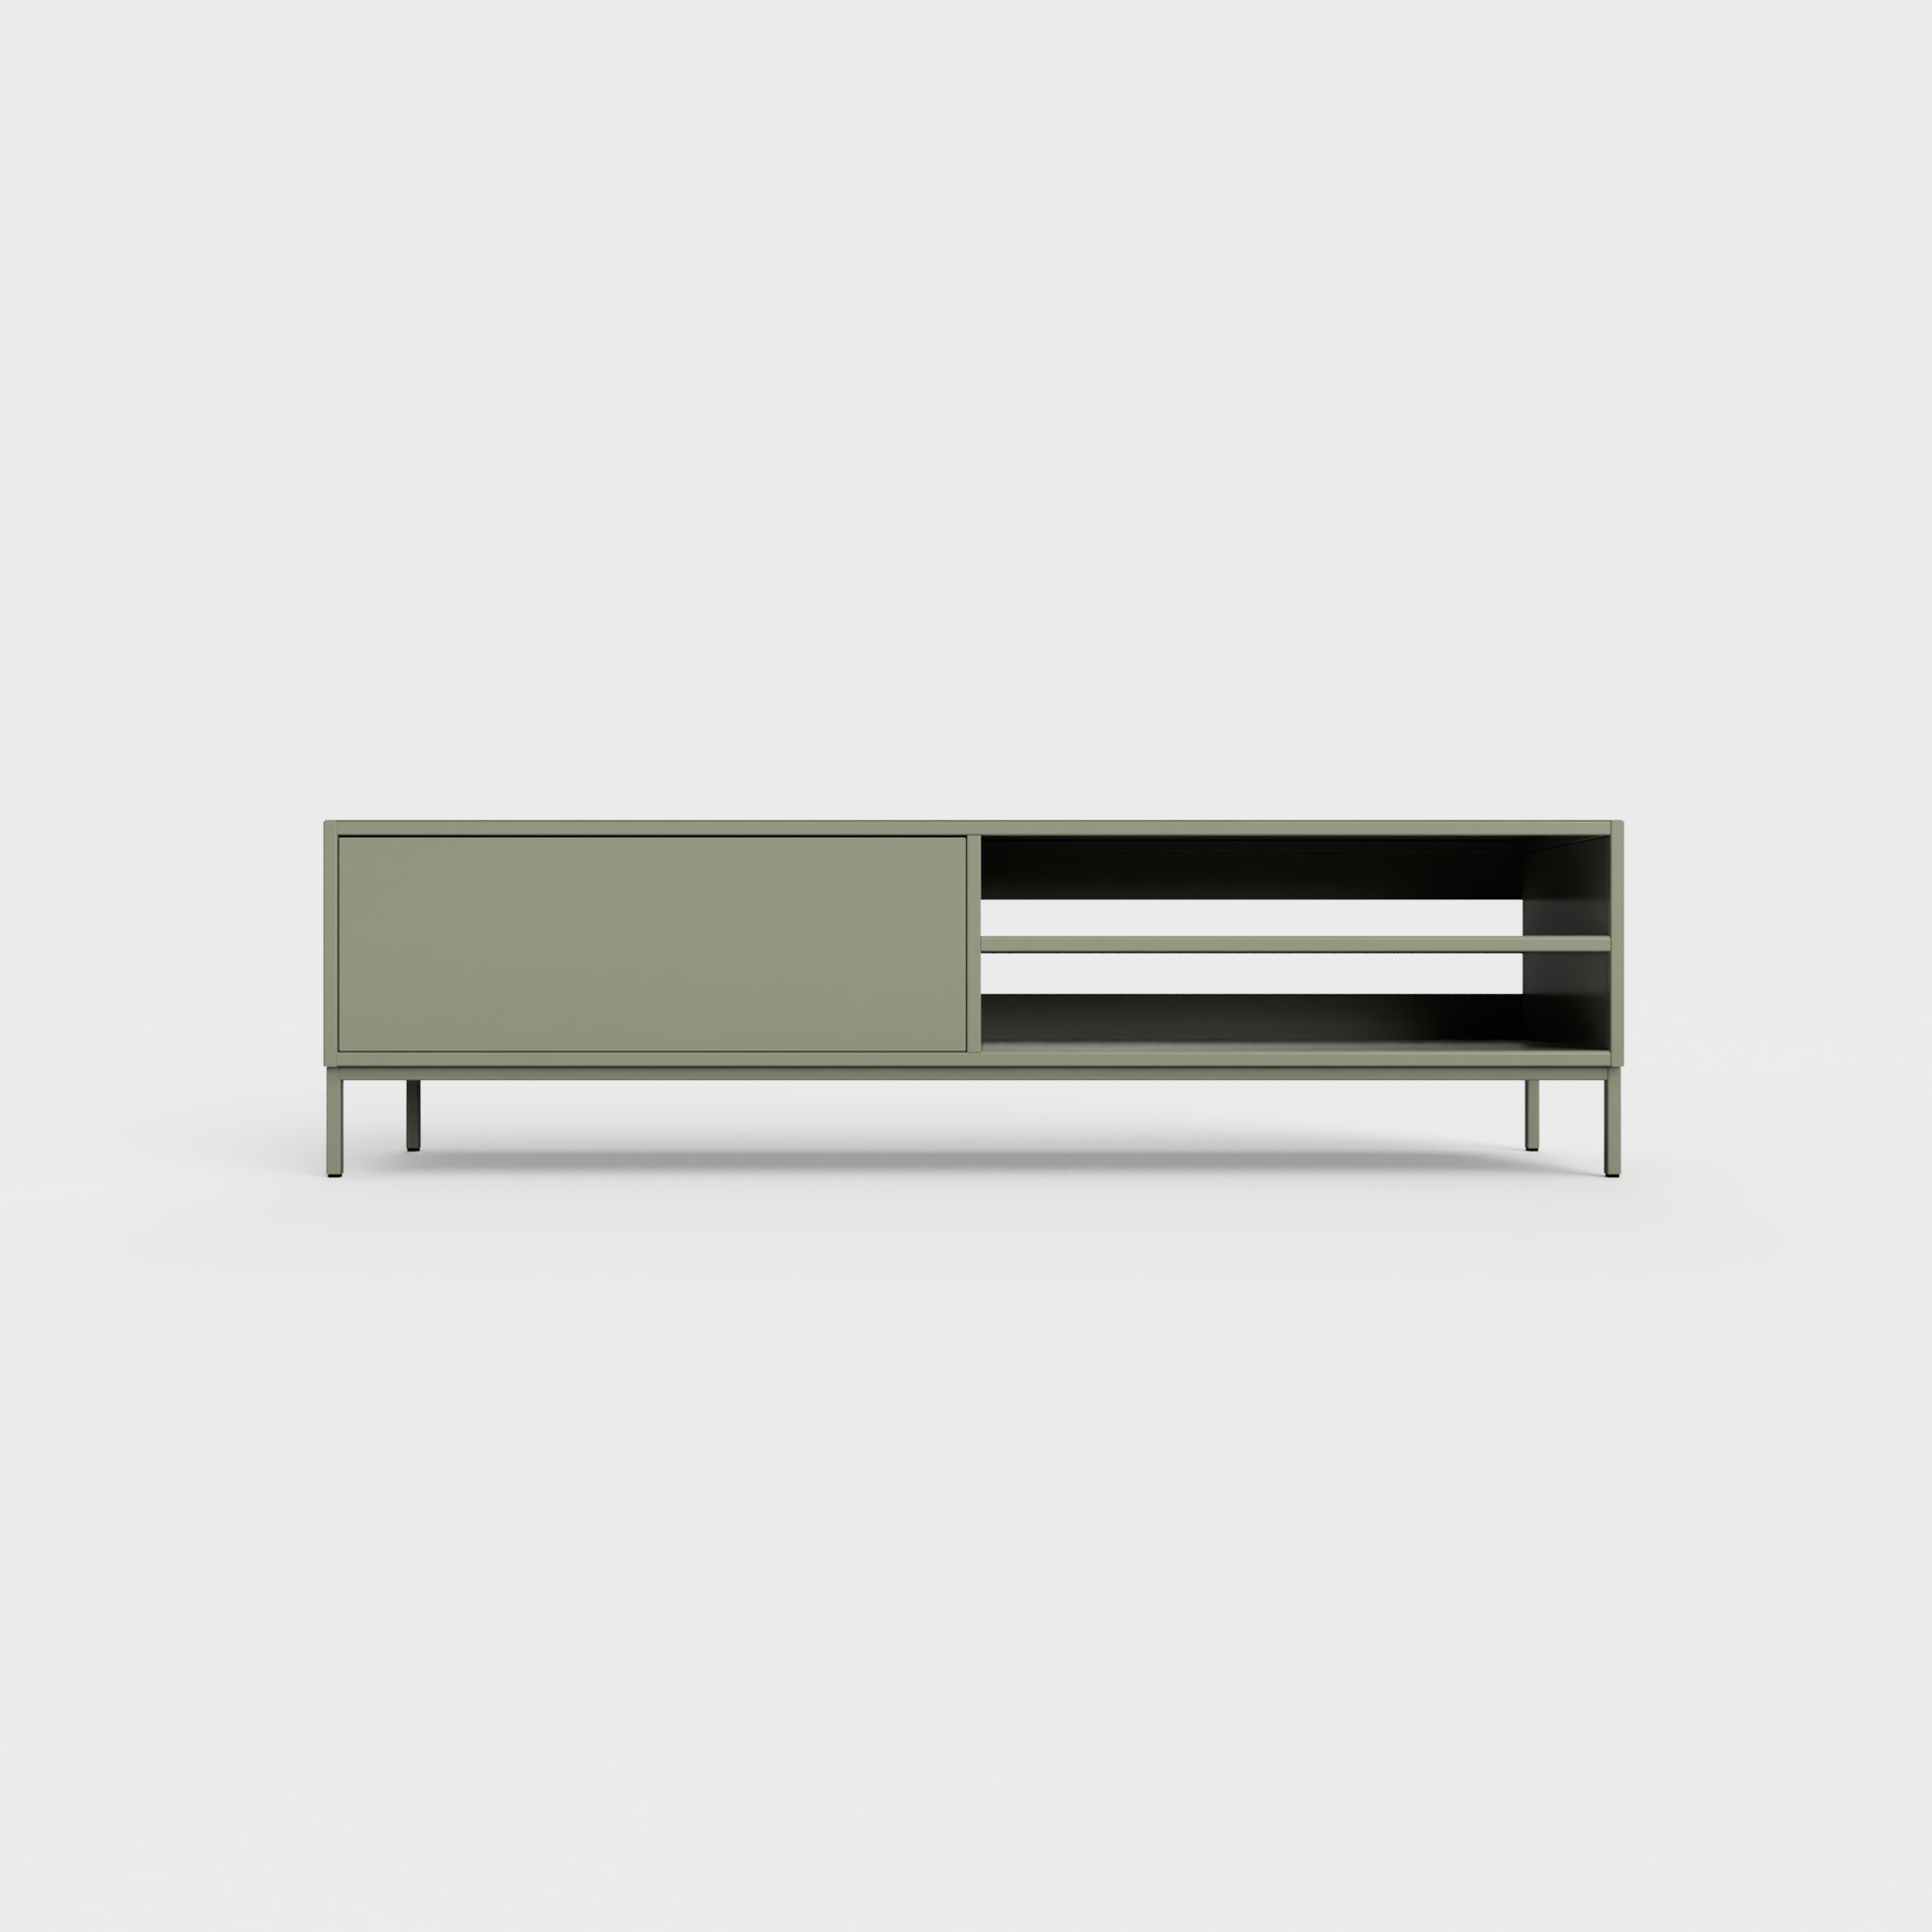 Prunus 02 Lowboard in Faded Olive color, powder-coated steel, elegant and modern piece of furniture for your living room